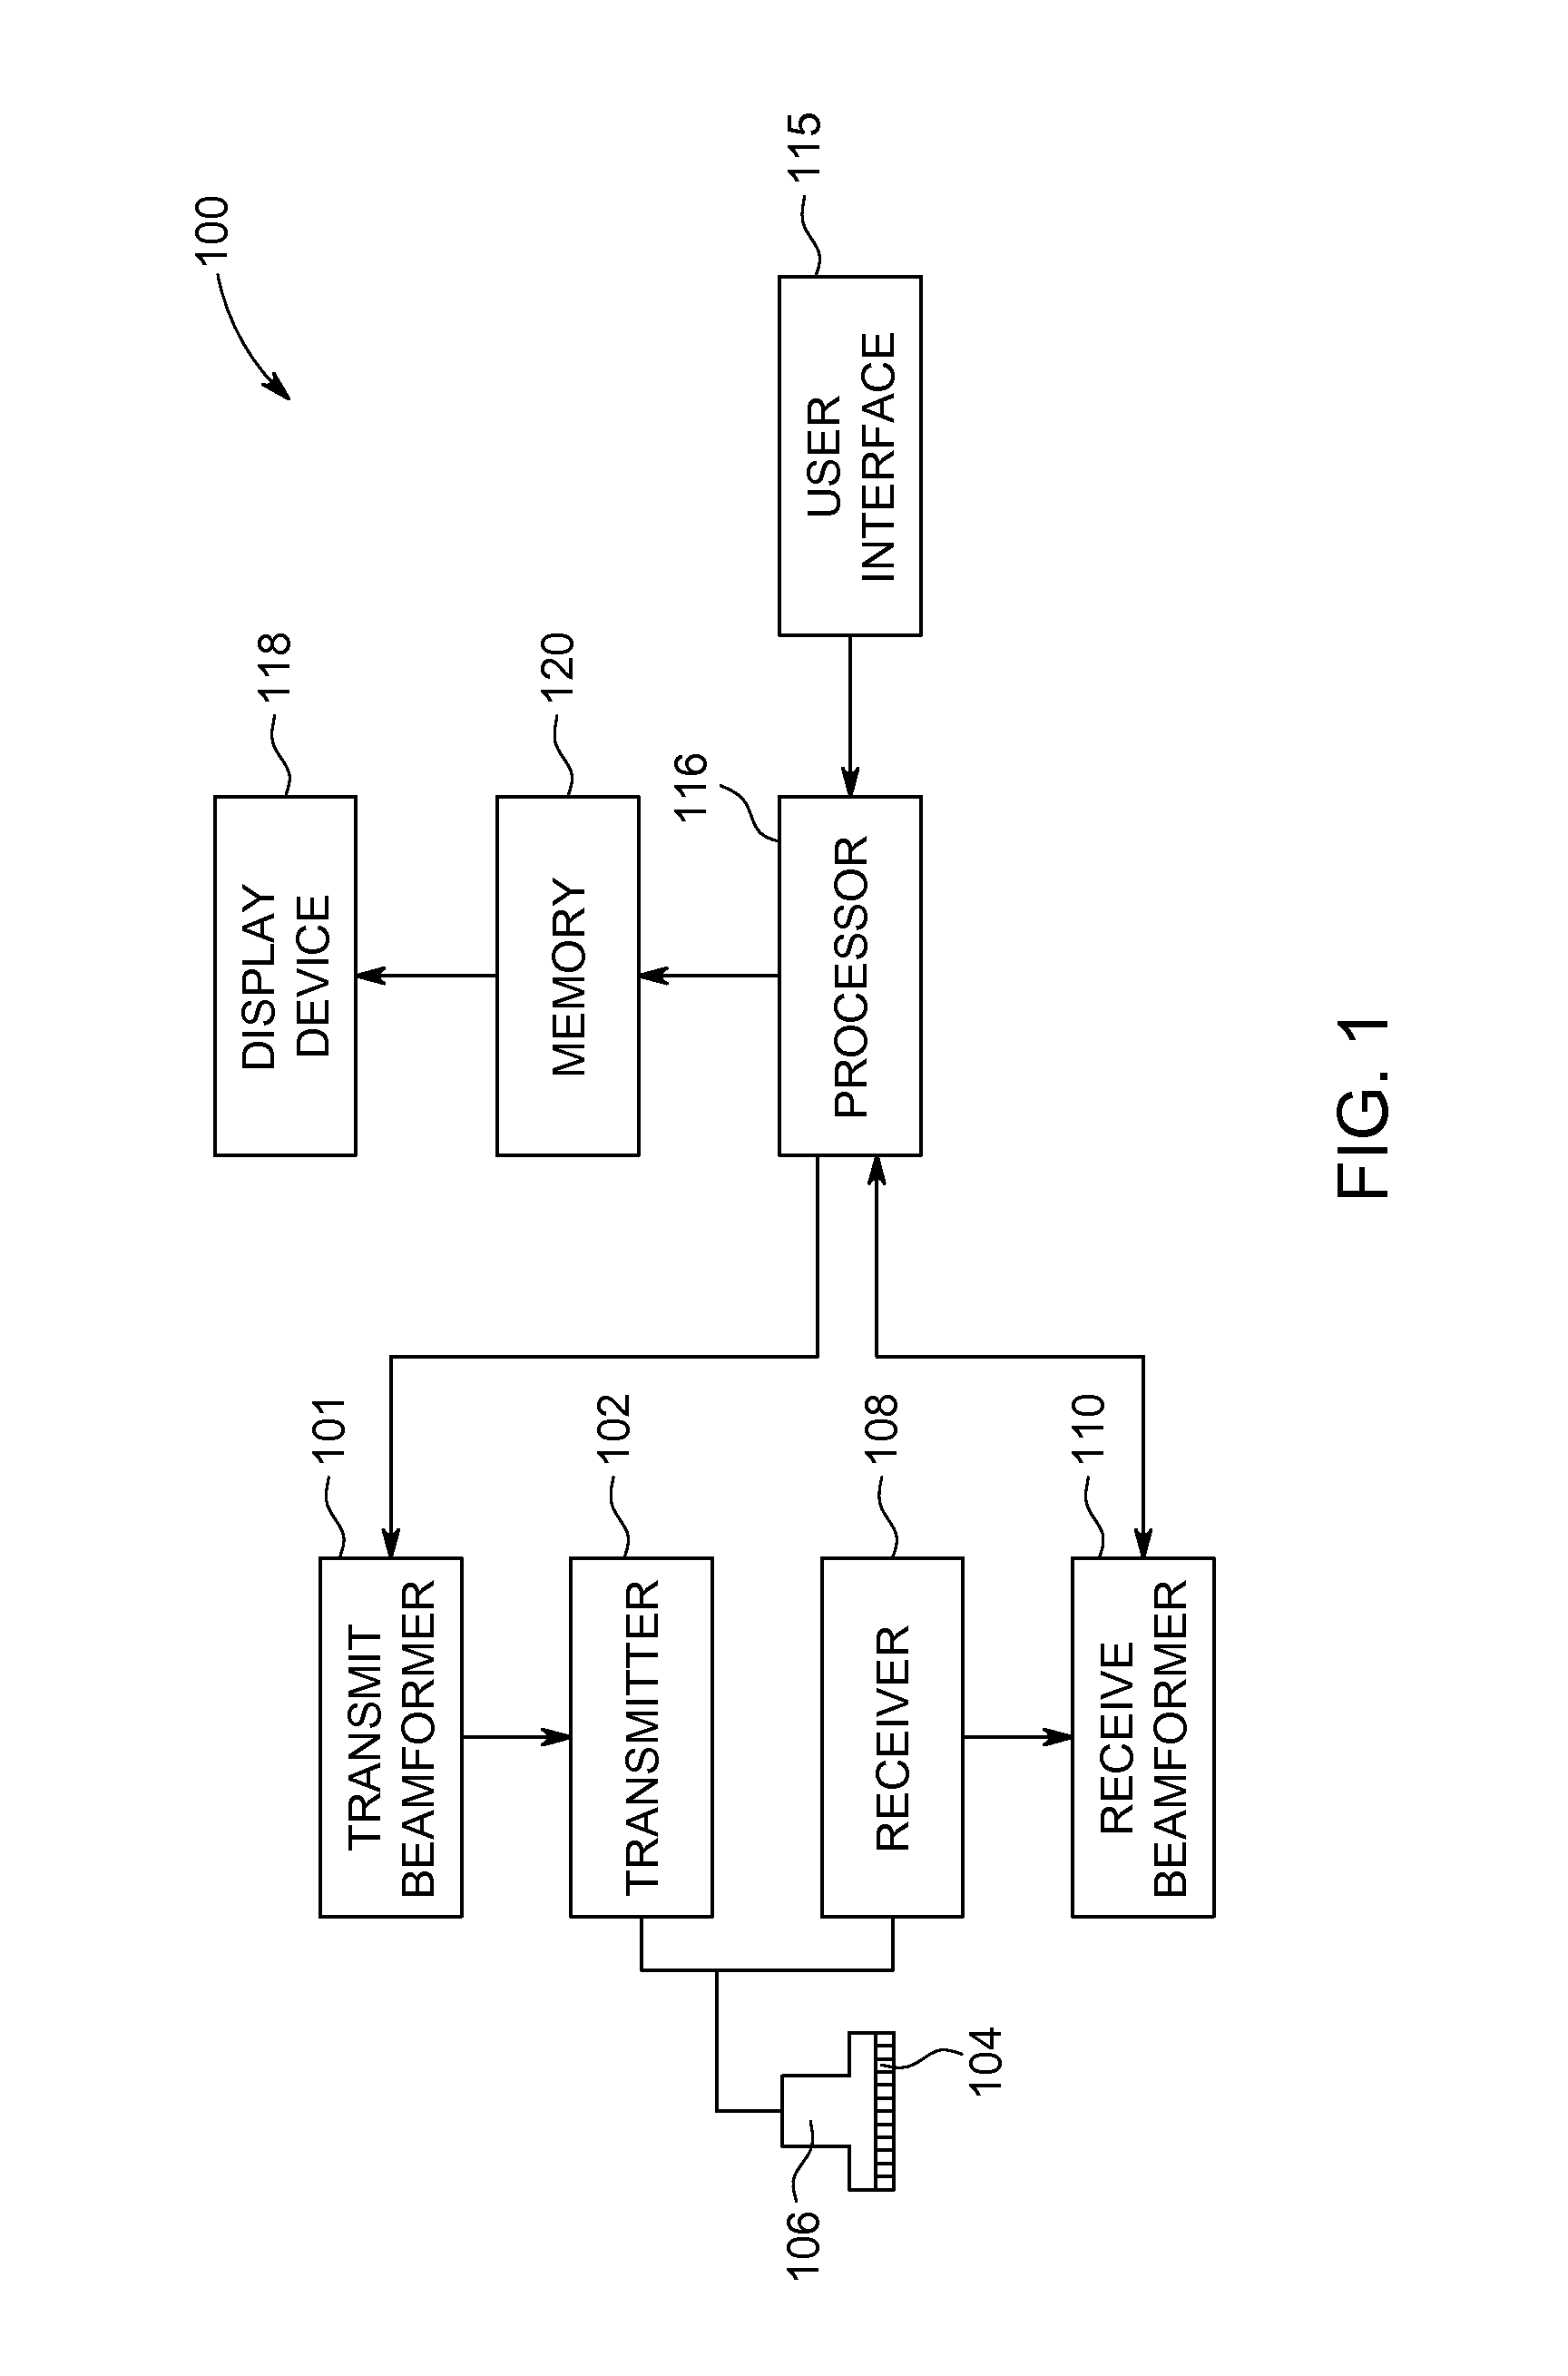 Ultrasound imaging system and ultrasound-based method for guiding a catheter